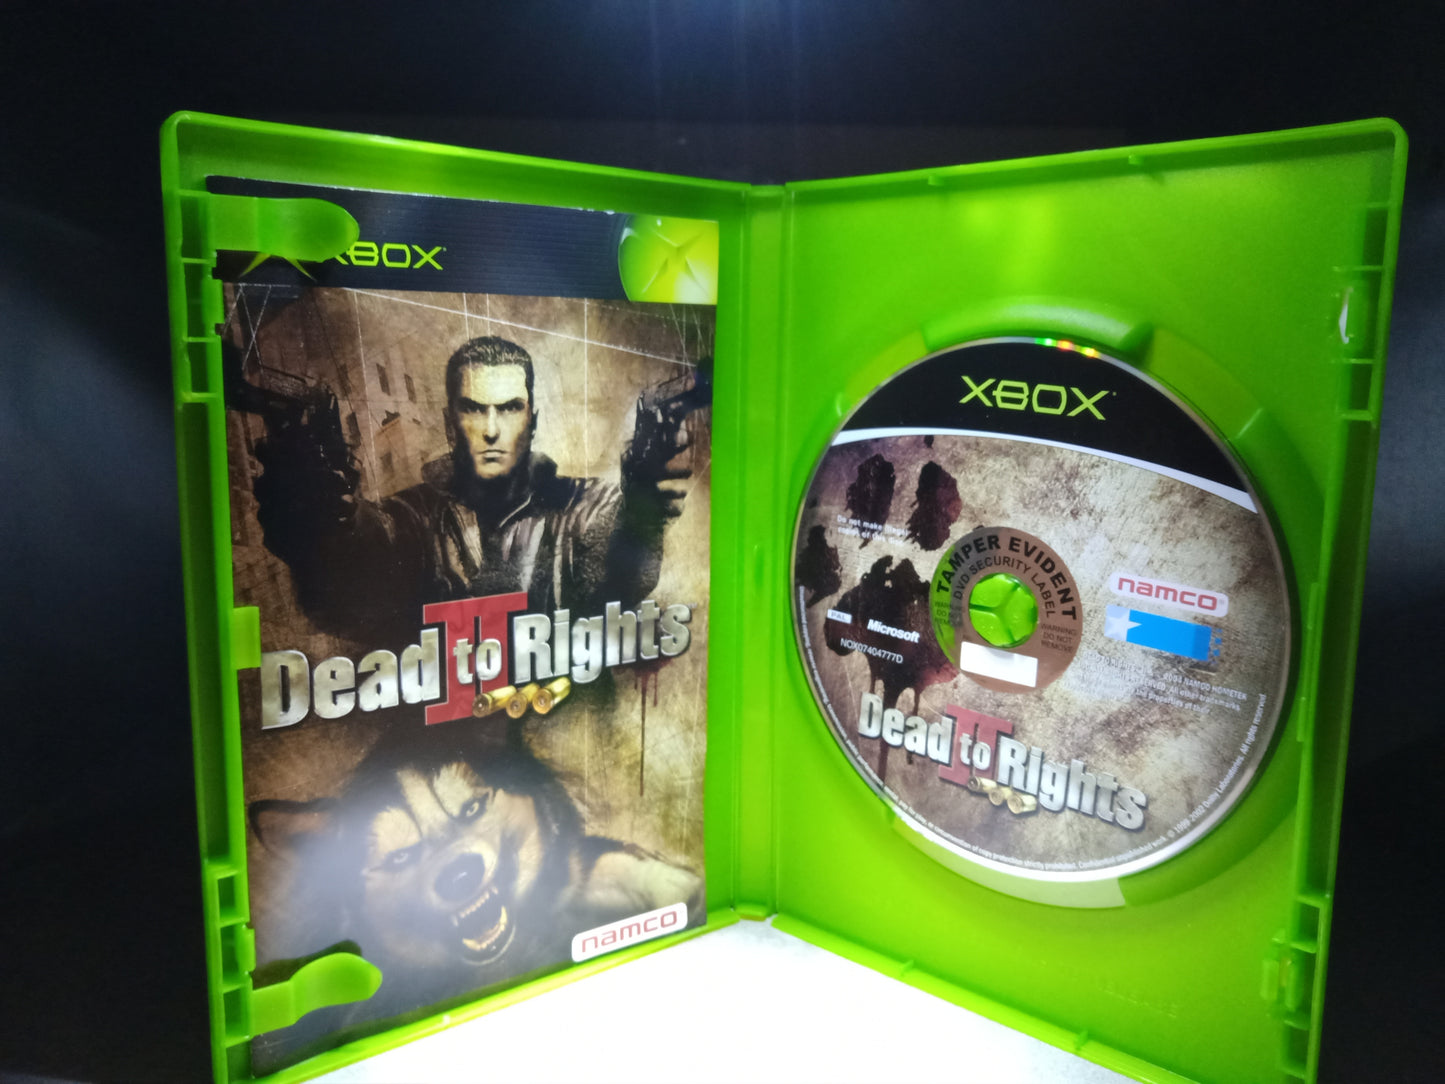 Dead To Rights 2